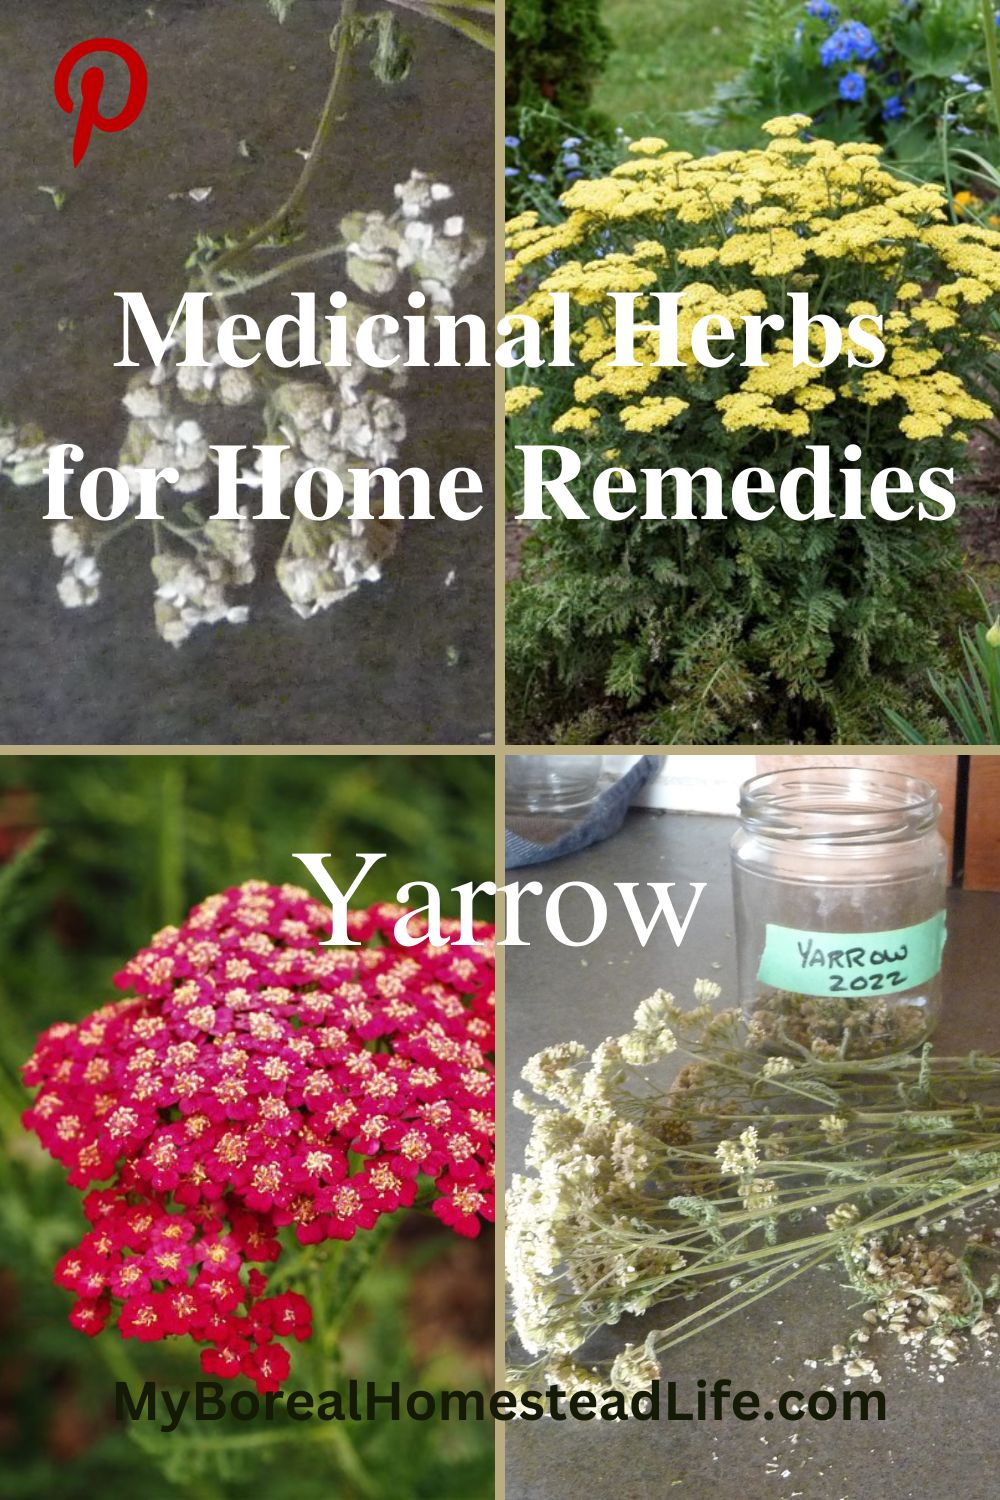 Yarrow, common Yarrow, apothecary, herbal remedies, home remedies